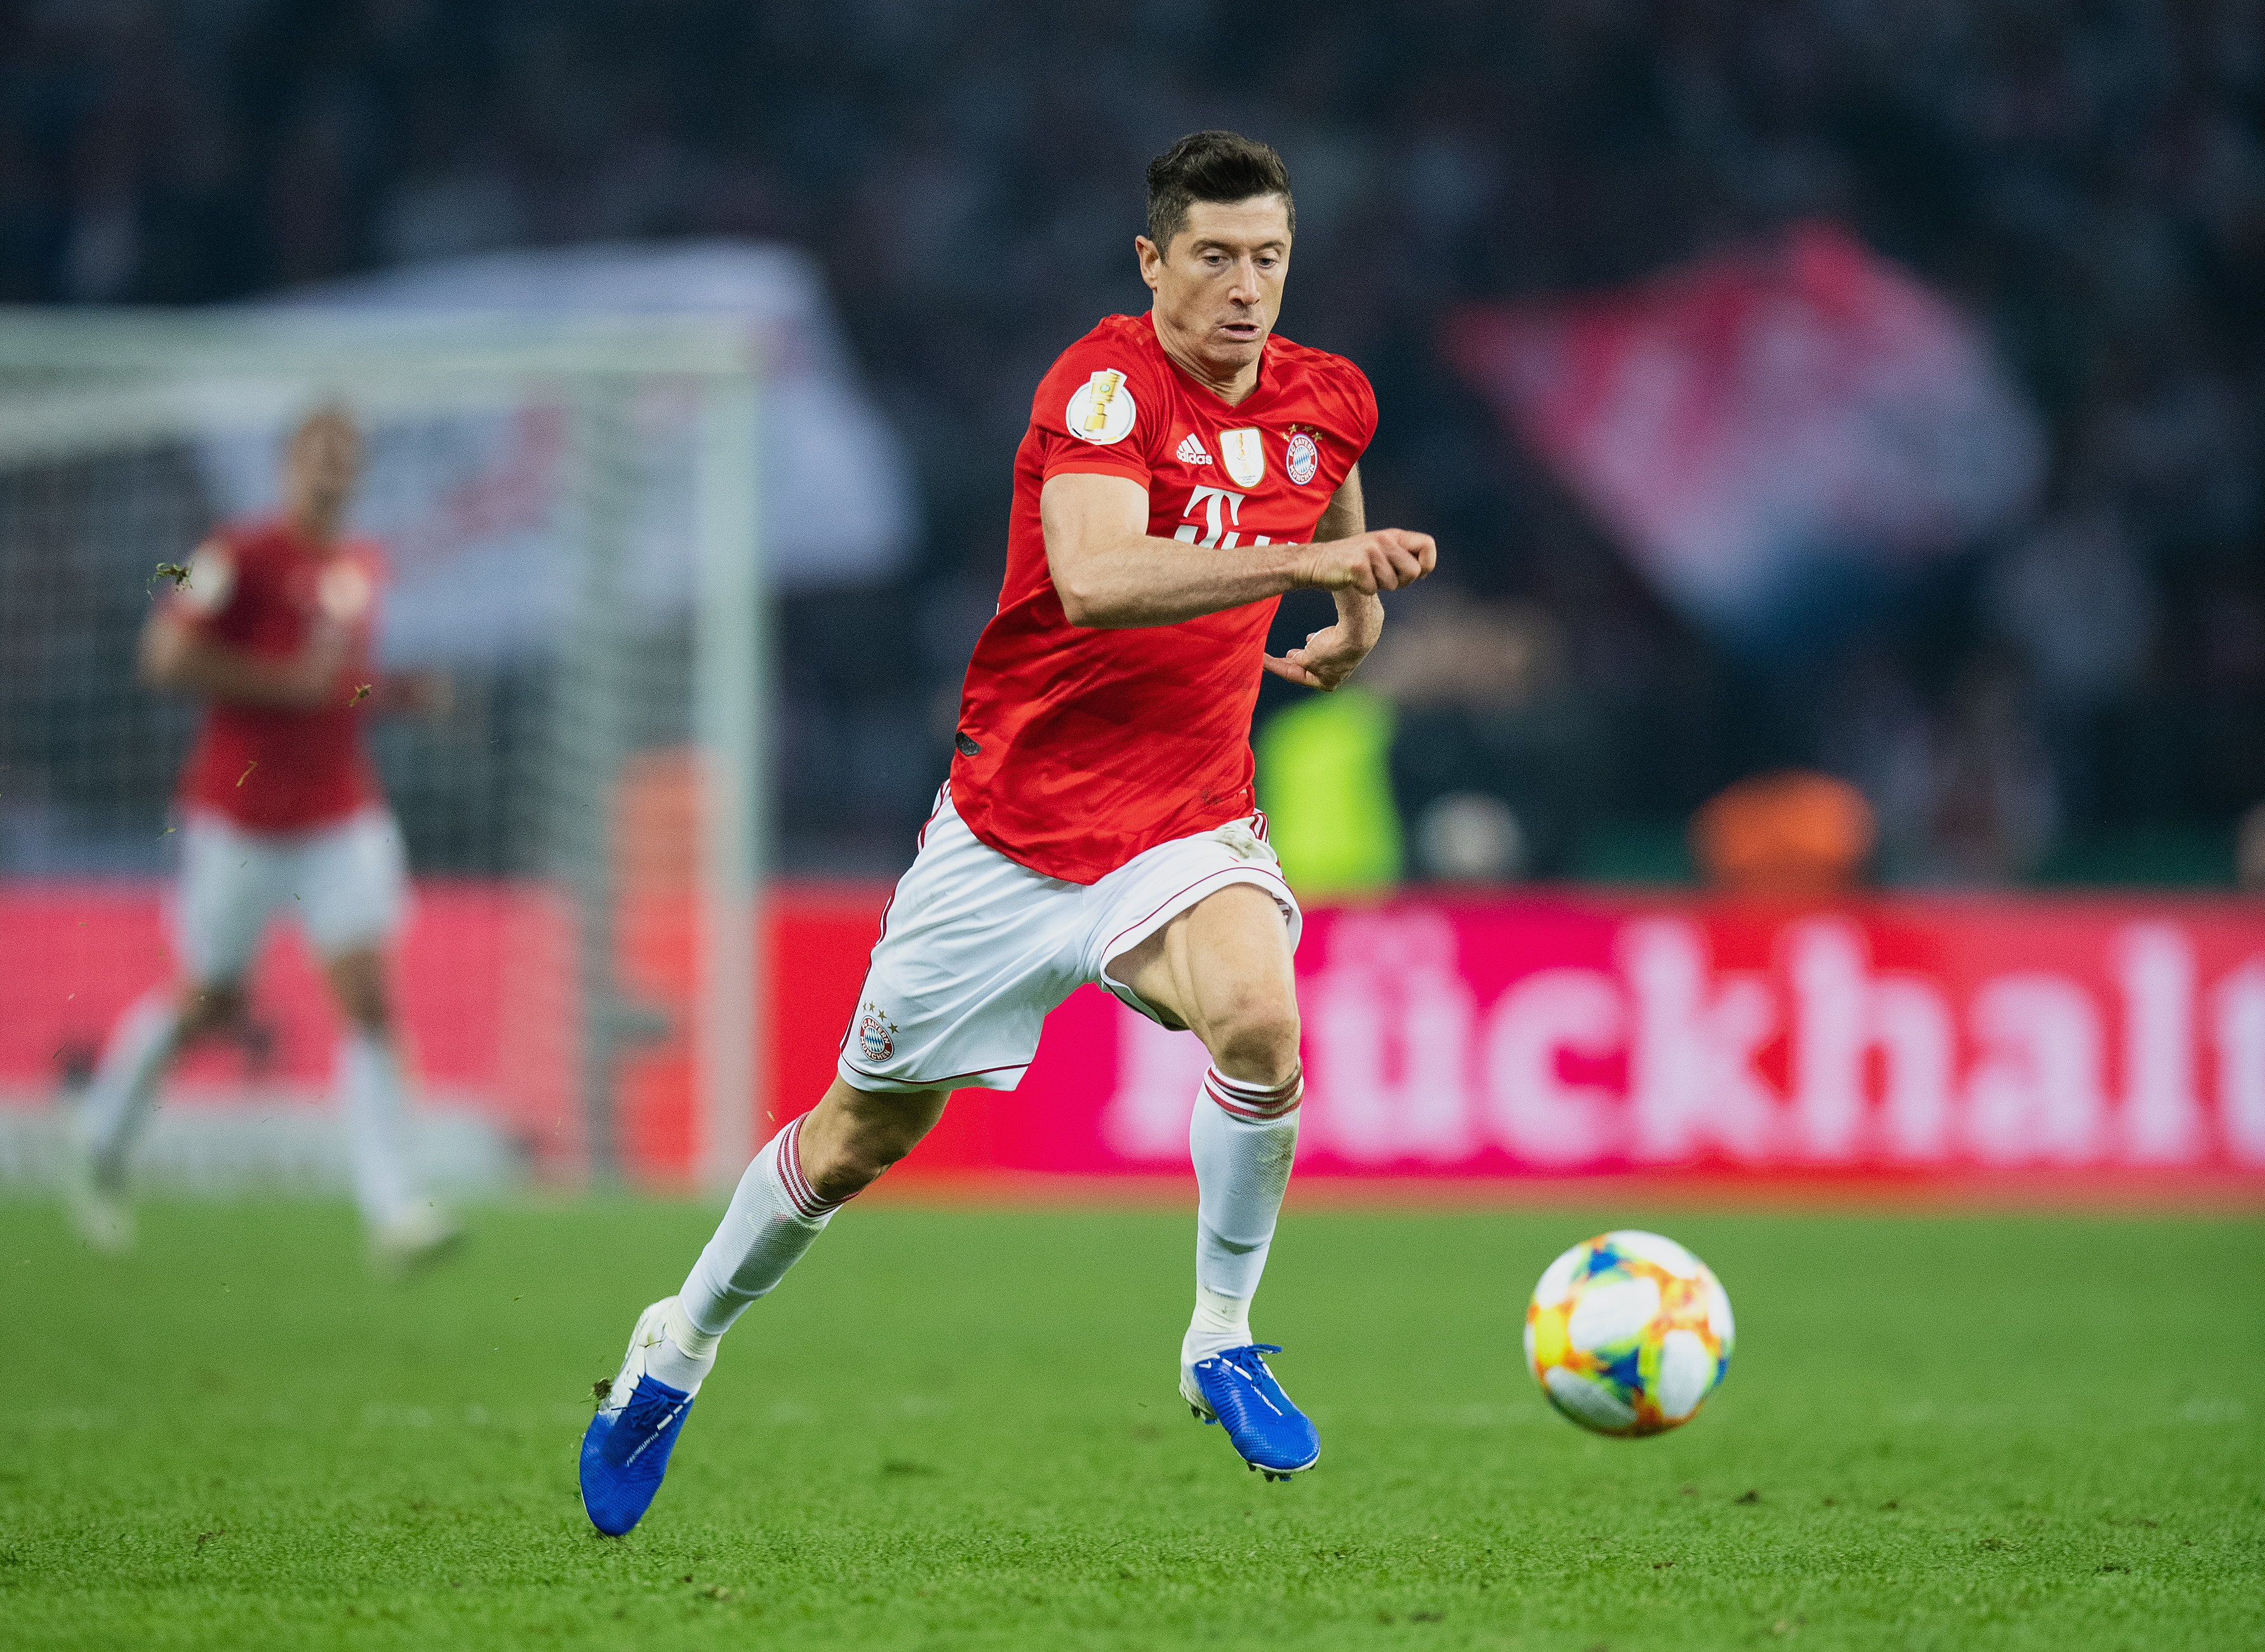 BERLIN, GERMANY - MAY 25: Robert Lewandowksi of FC Bayern Muenchen controls the ball during the DFB Cup final between RB Leipzig and Bayern Muenchen at Olympiastadion on May 25, 2019 in Berlin, Germany. (Photo by Matthias Hangst/Bongarts/Getty Images)